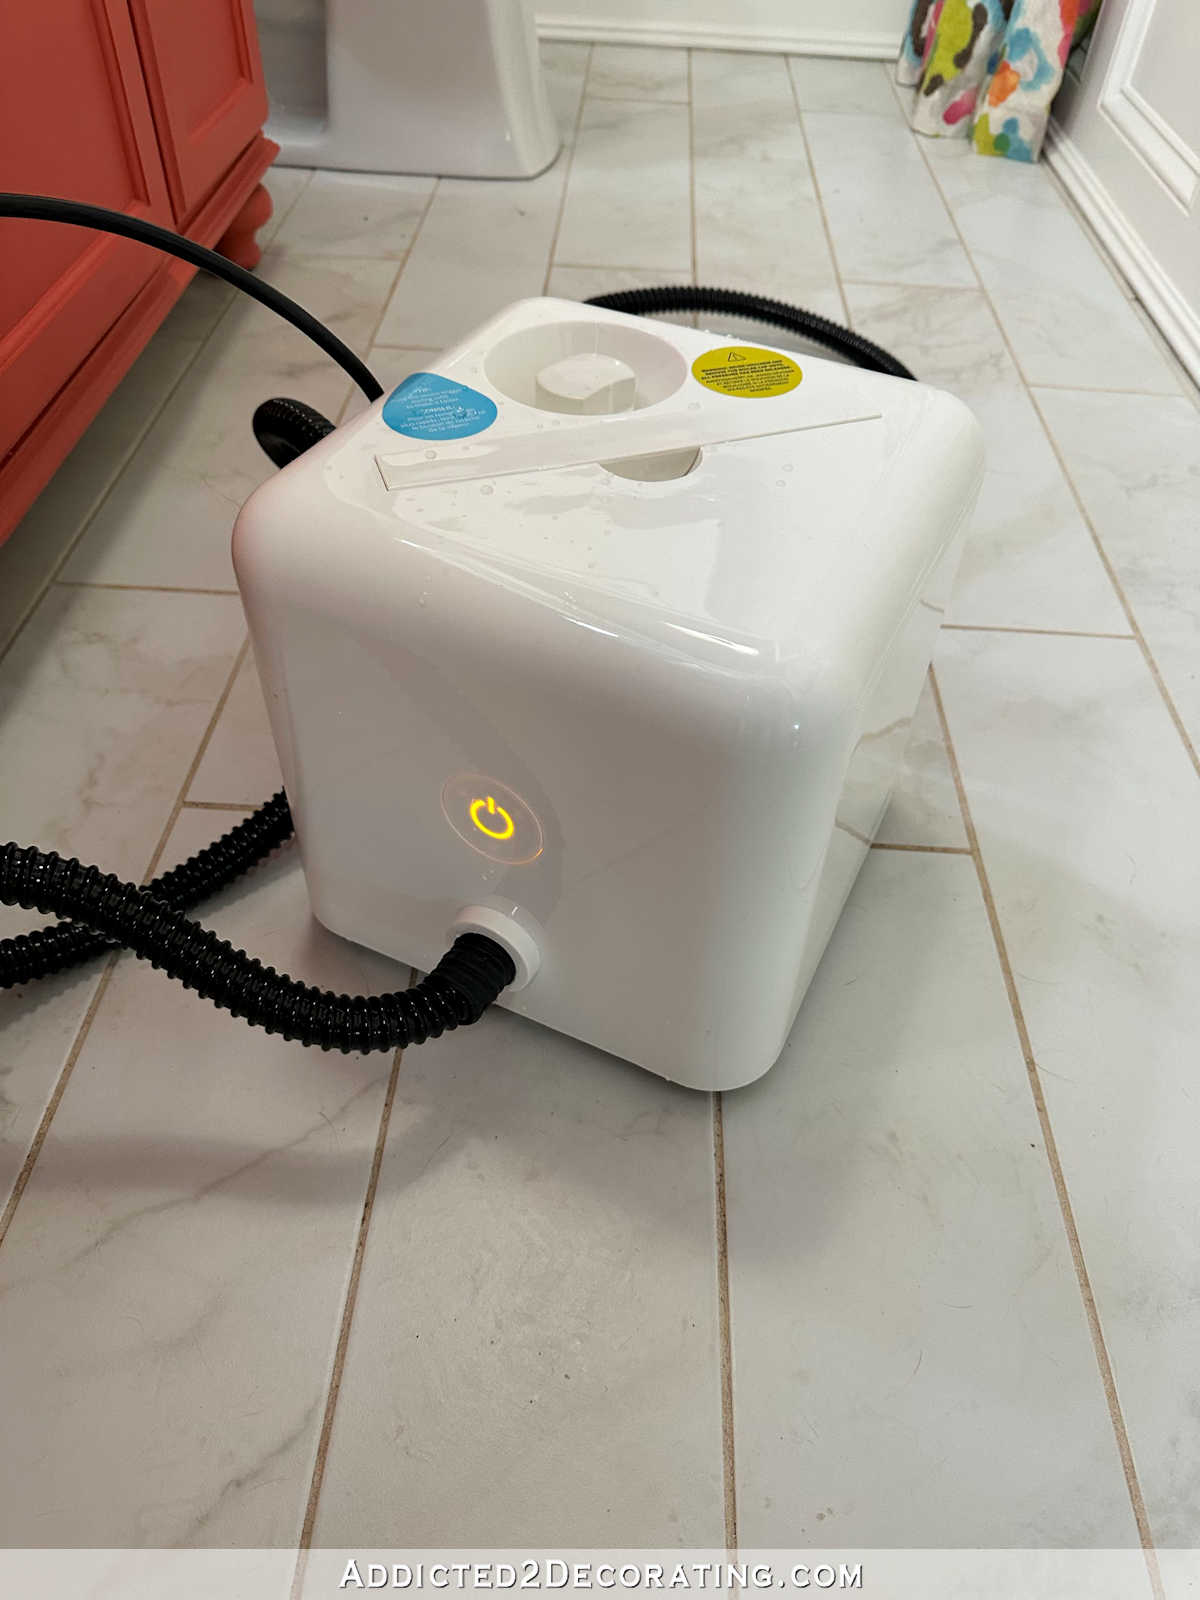 Putting Instagram Influencer Product Recommendations To The Test — Dupray Neat Steam Cleaner